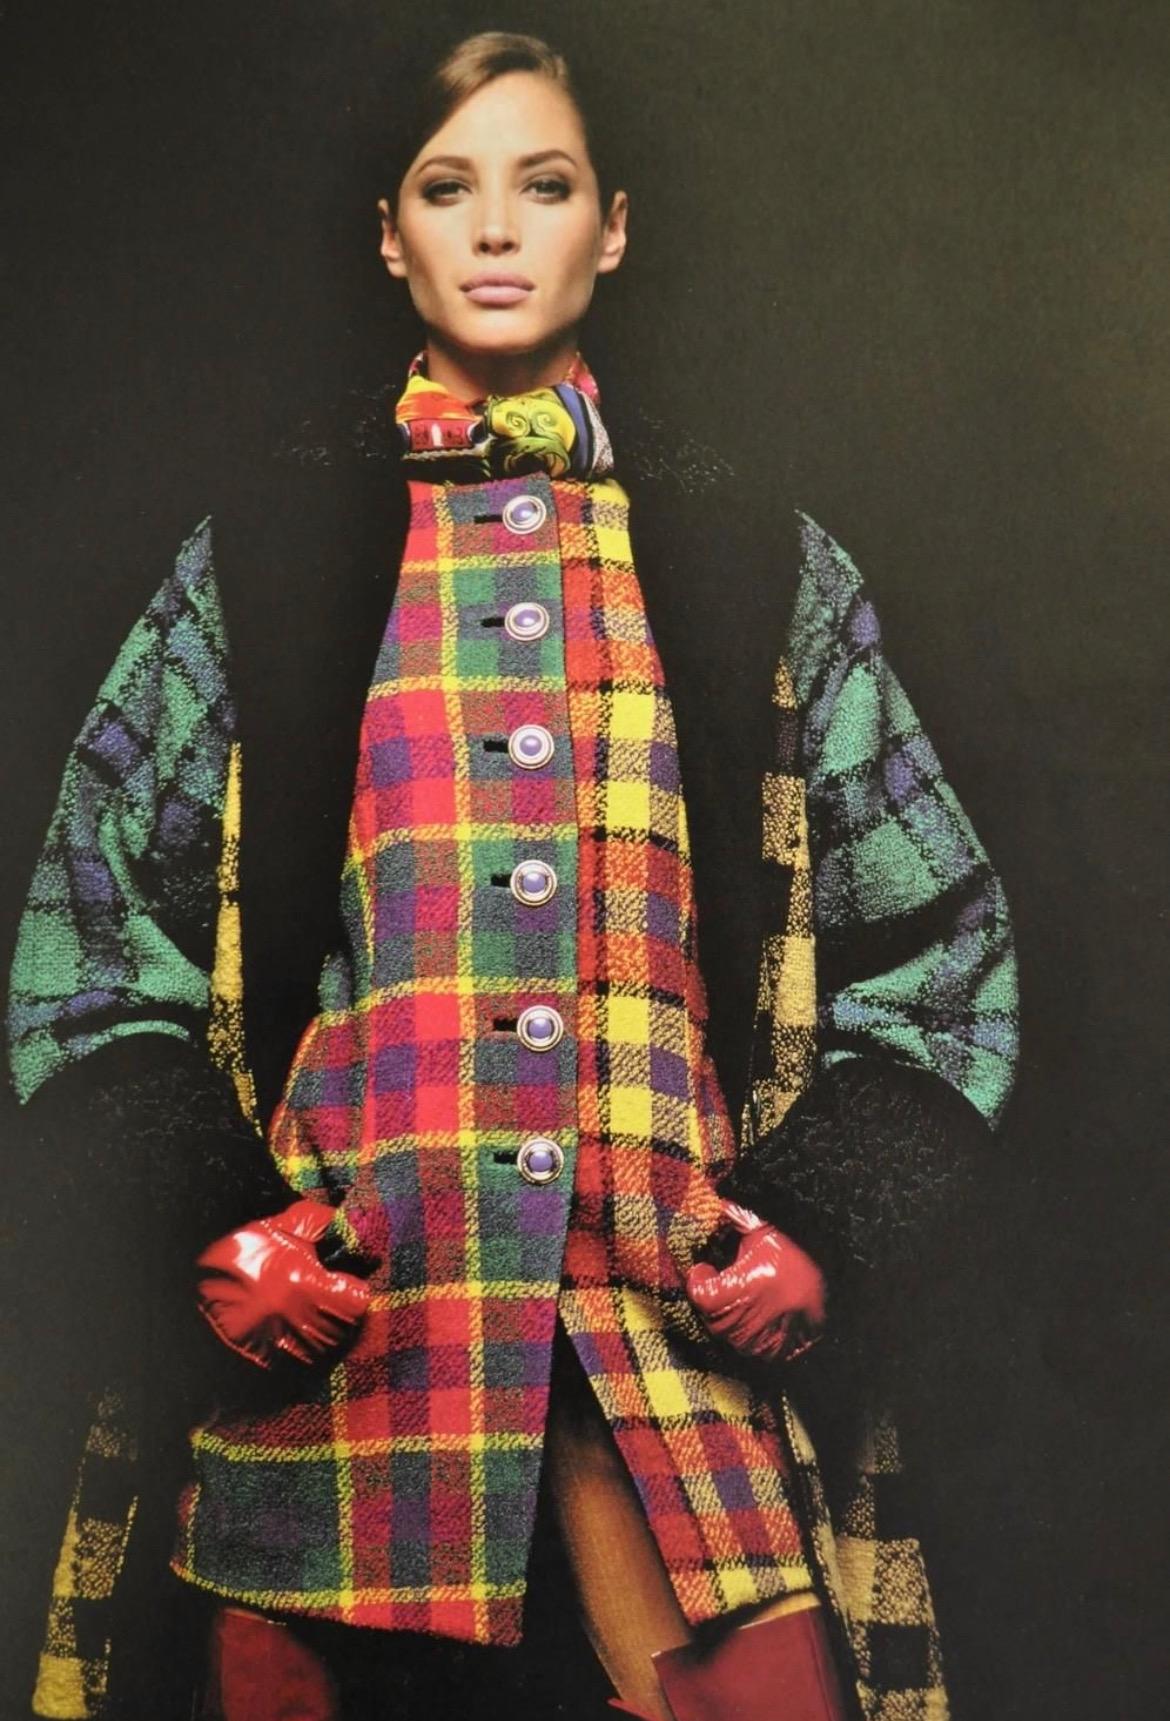 Presenting a fabulous multicolor plaid tweed Gianni Versace oversized coat, designed by Gianni Versace. From the Fall/Winter 1991 collection, coats made from the same tweed debuted on the season's runway and were highlighted in the season's ad